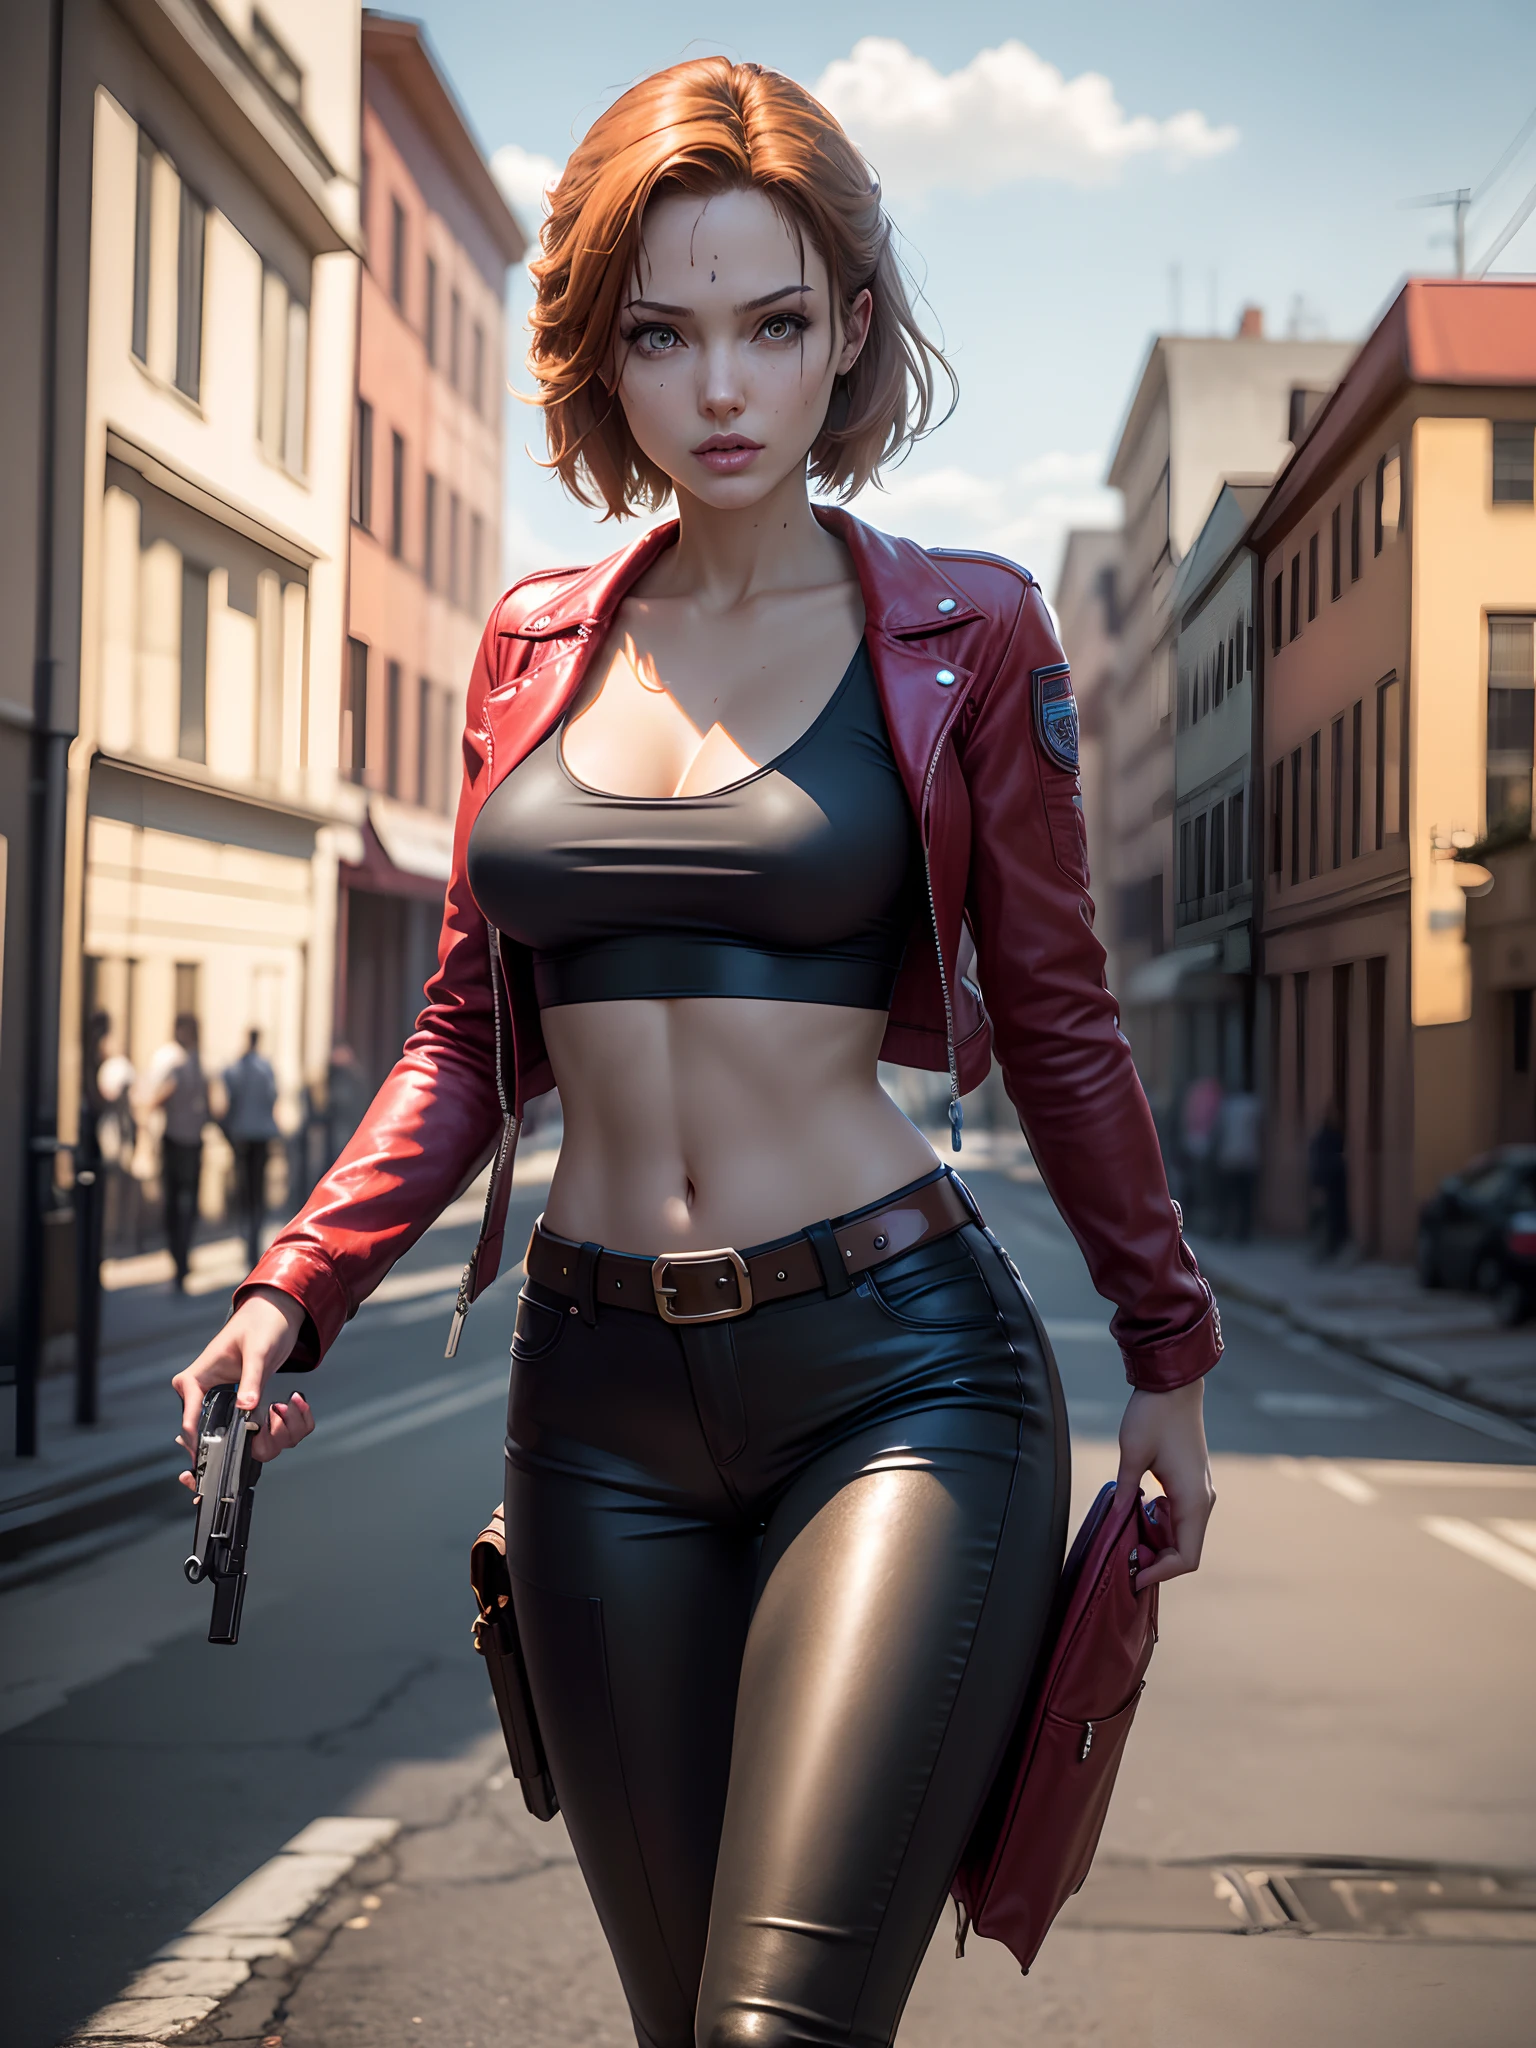 Resident Evil, Apocalyptic city, Beautiful Claire Redfield being by a beautiful woman full body pink skin medium red hair, tight clothing red leather jacket, holster holding a gun, realistic detailed face body clear image Highly detailed CGI 8K, hologram, ( medium breasts:1.3), (realism:1.5), (Realisitc:1.4), (Absurdity:1.4), 8k, ultra-detailed, beautiful girl detailed, (1:1.4 only), 1 girl, (Viewer facing:1.2 ), (bright sunny day:1.5), Intricate body details, (short:1.3), (best quality: 1.0), (Ultra Highres): 1.0), highly detailed face and eyes, (photorealistic: 1.2)